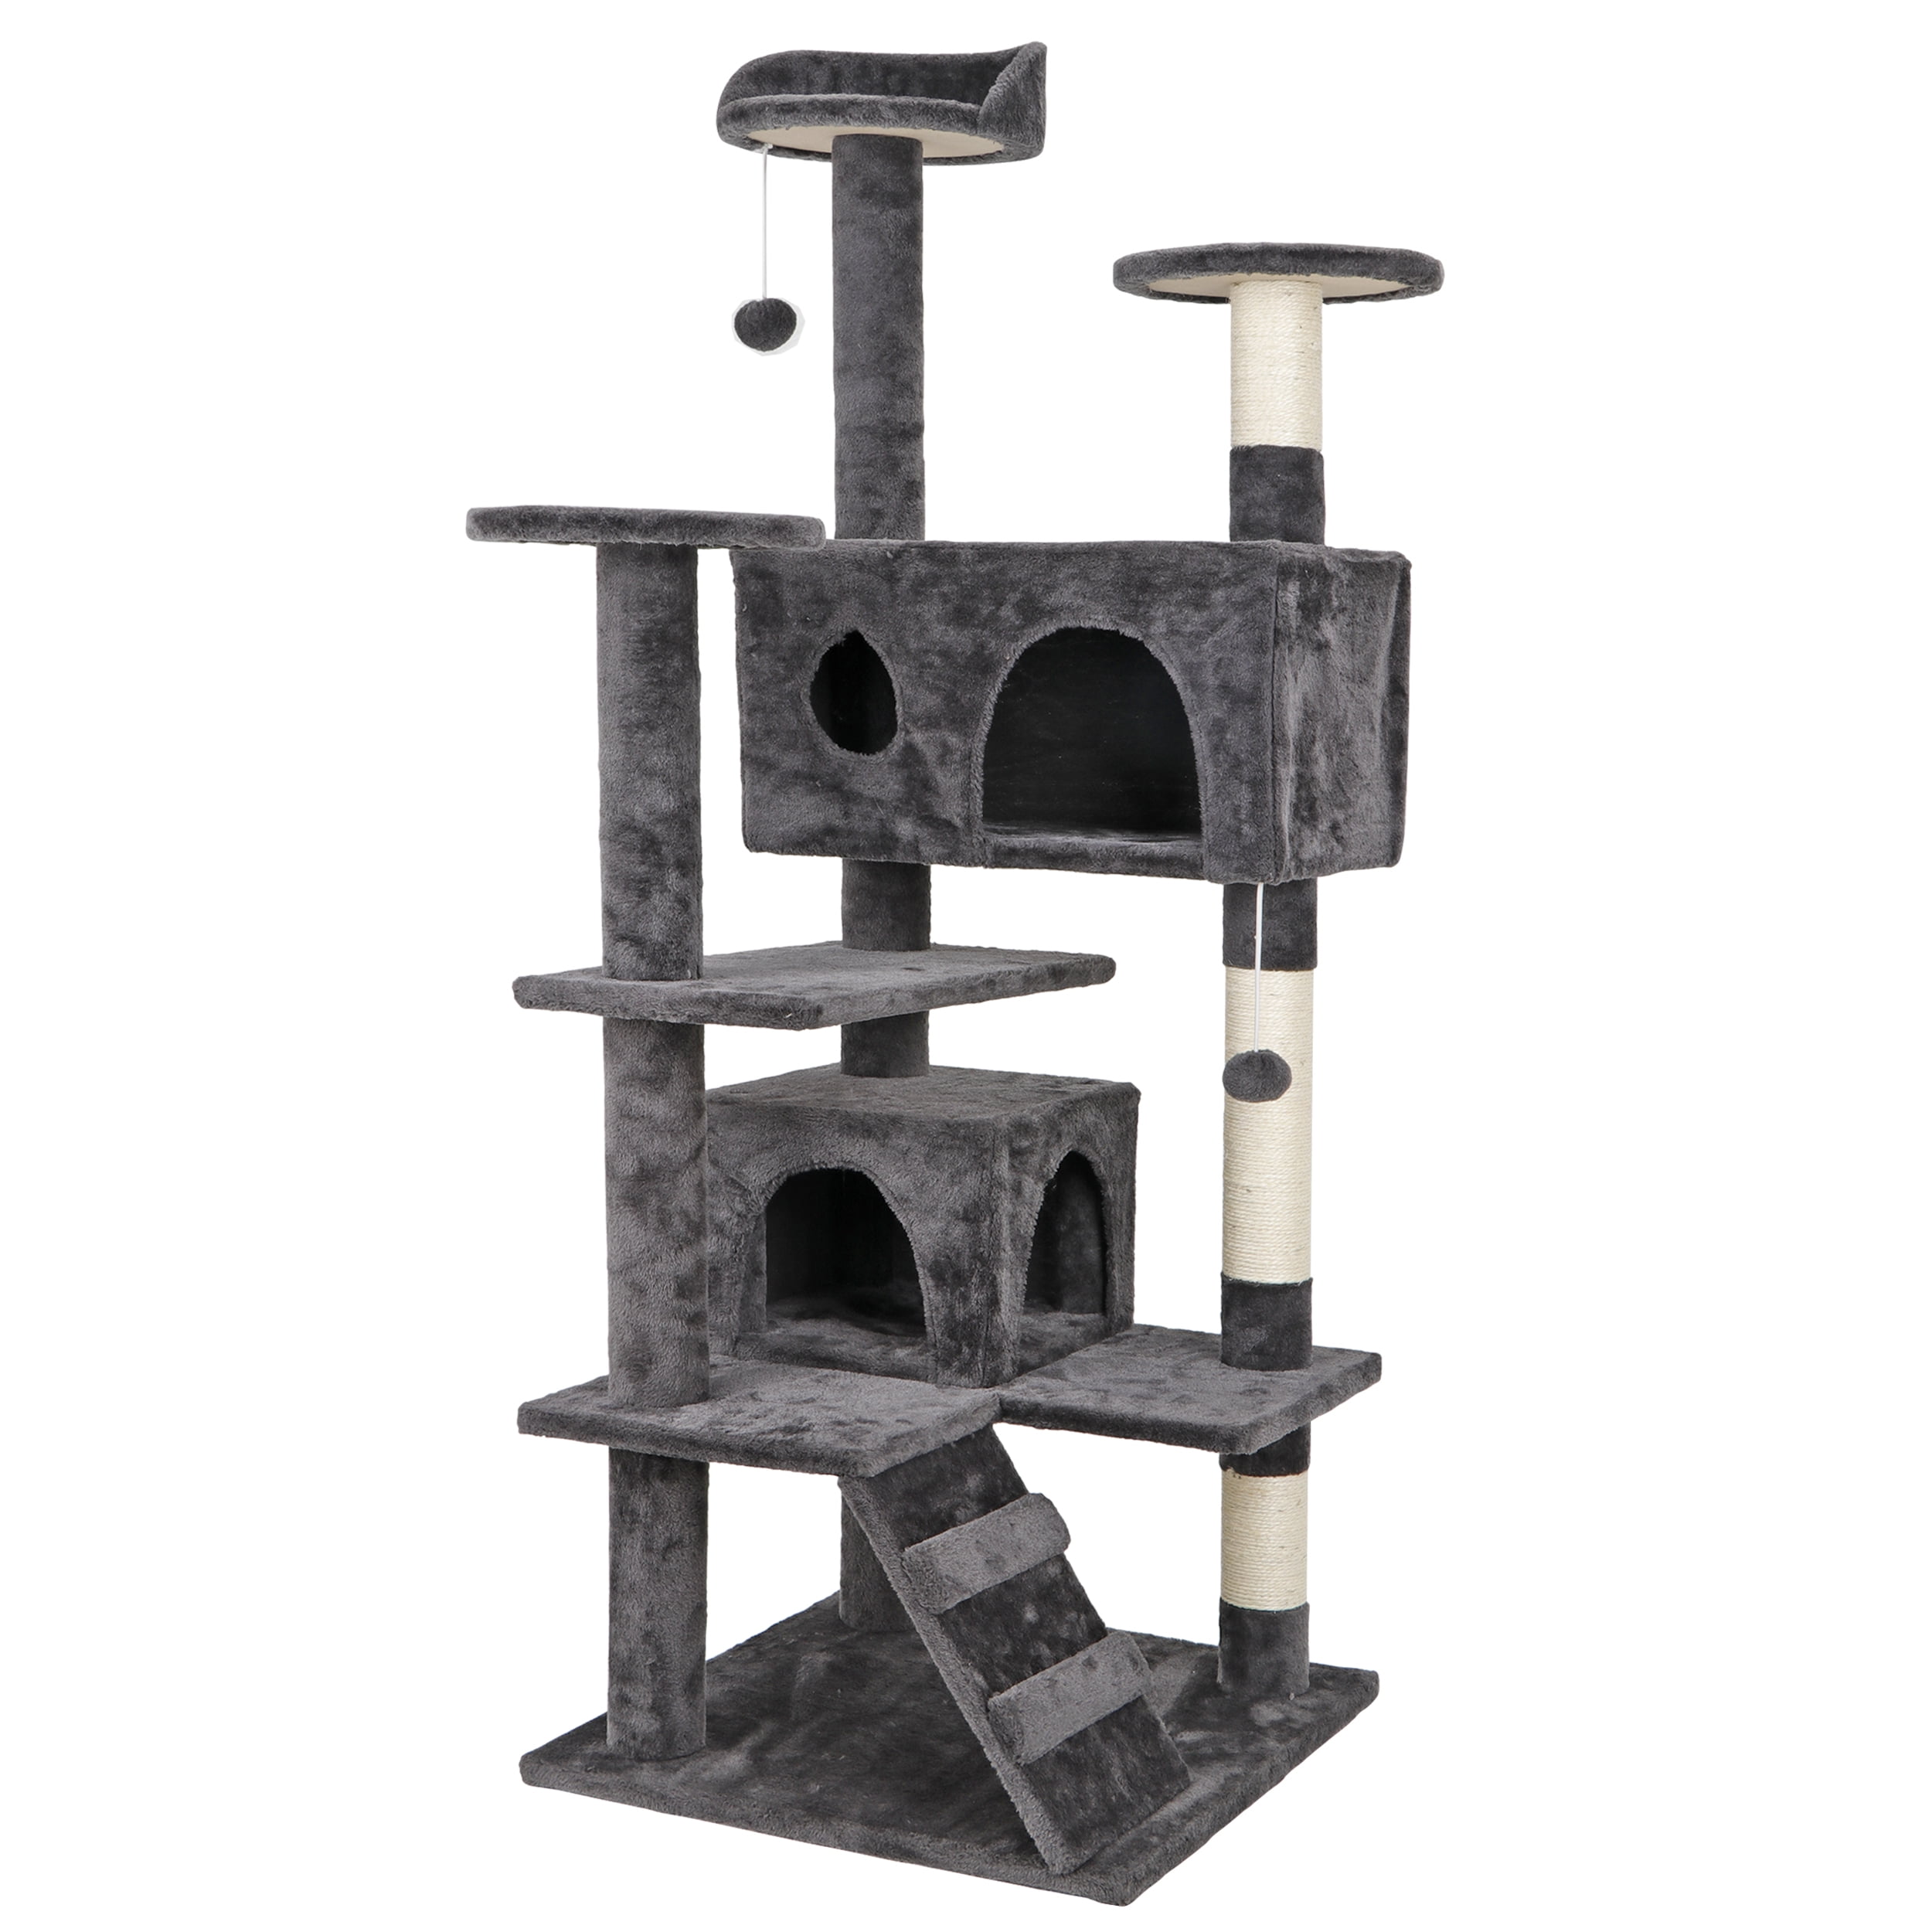 ZENY Cat Tree with Condos and Scratching Post